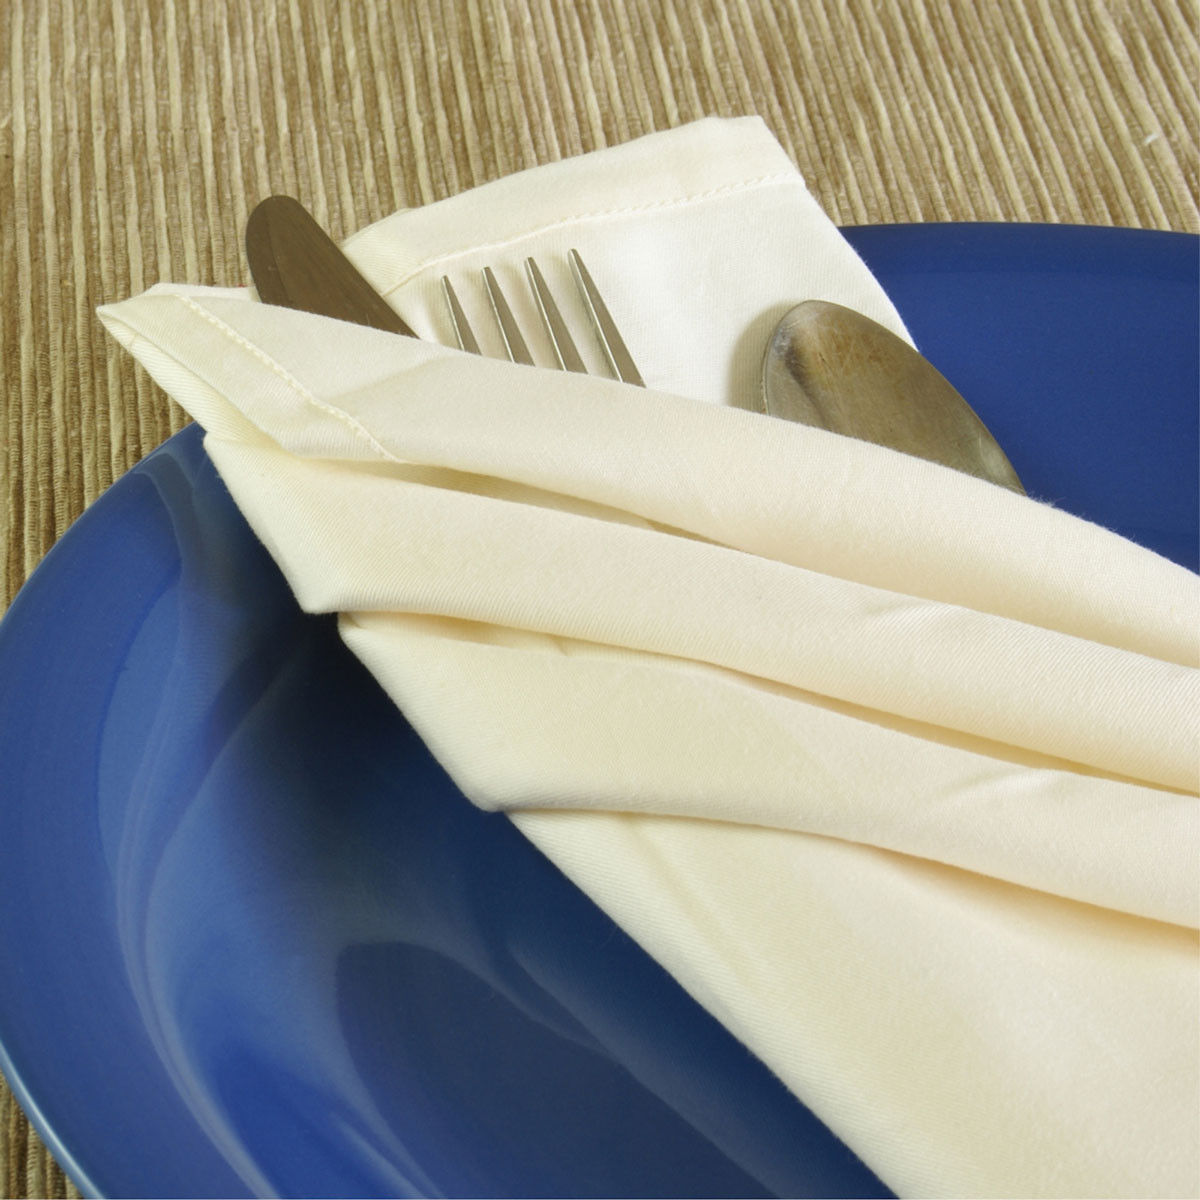 Why is the Infinity Spun Polyester Napkins, a spun polyester fabric wholesale, popular among customers?